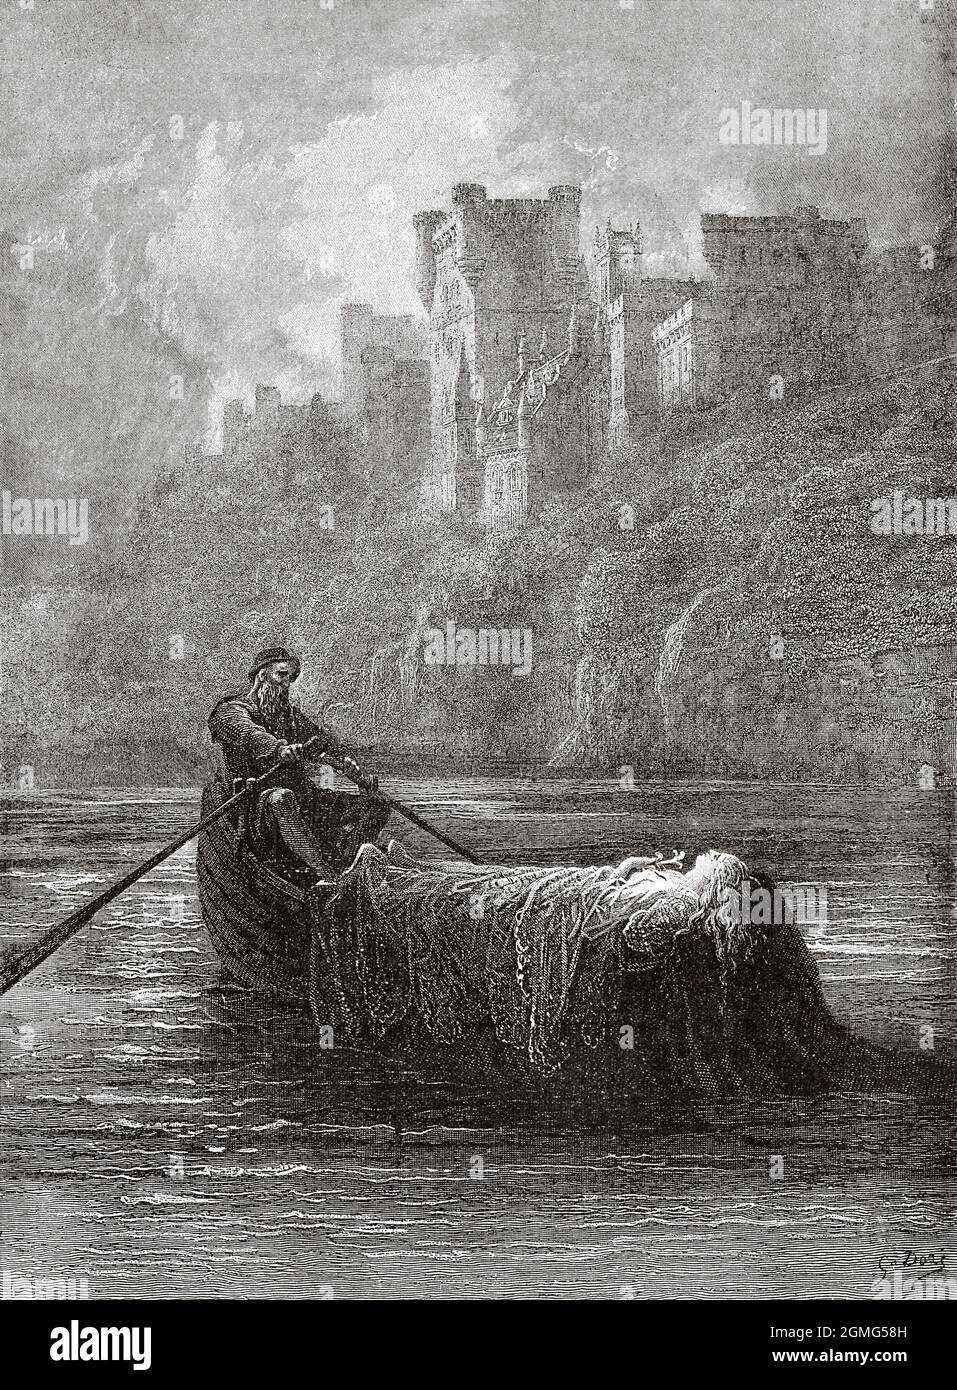 The Body of Elaine on its way to King Arthur Palace, from Idylls of the King by the English poet Lord Alfred Tennyson (1809–1892) illustration by Gustave Dore. Old 19th century engraved illustration from La Ilustración Artística 1882 Stock Photo